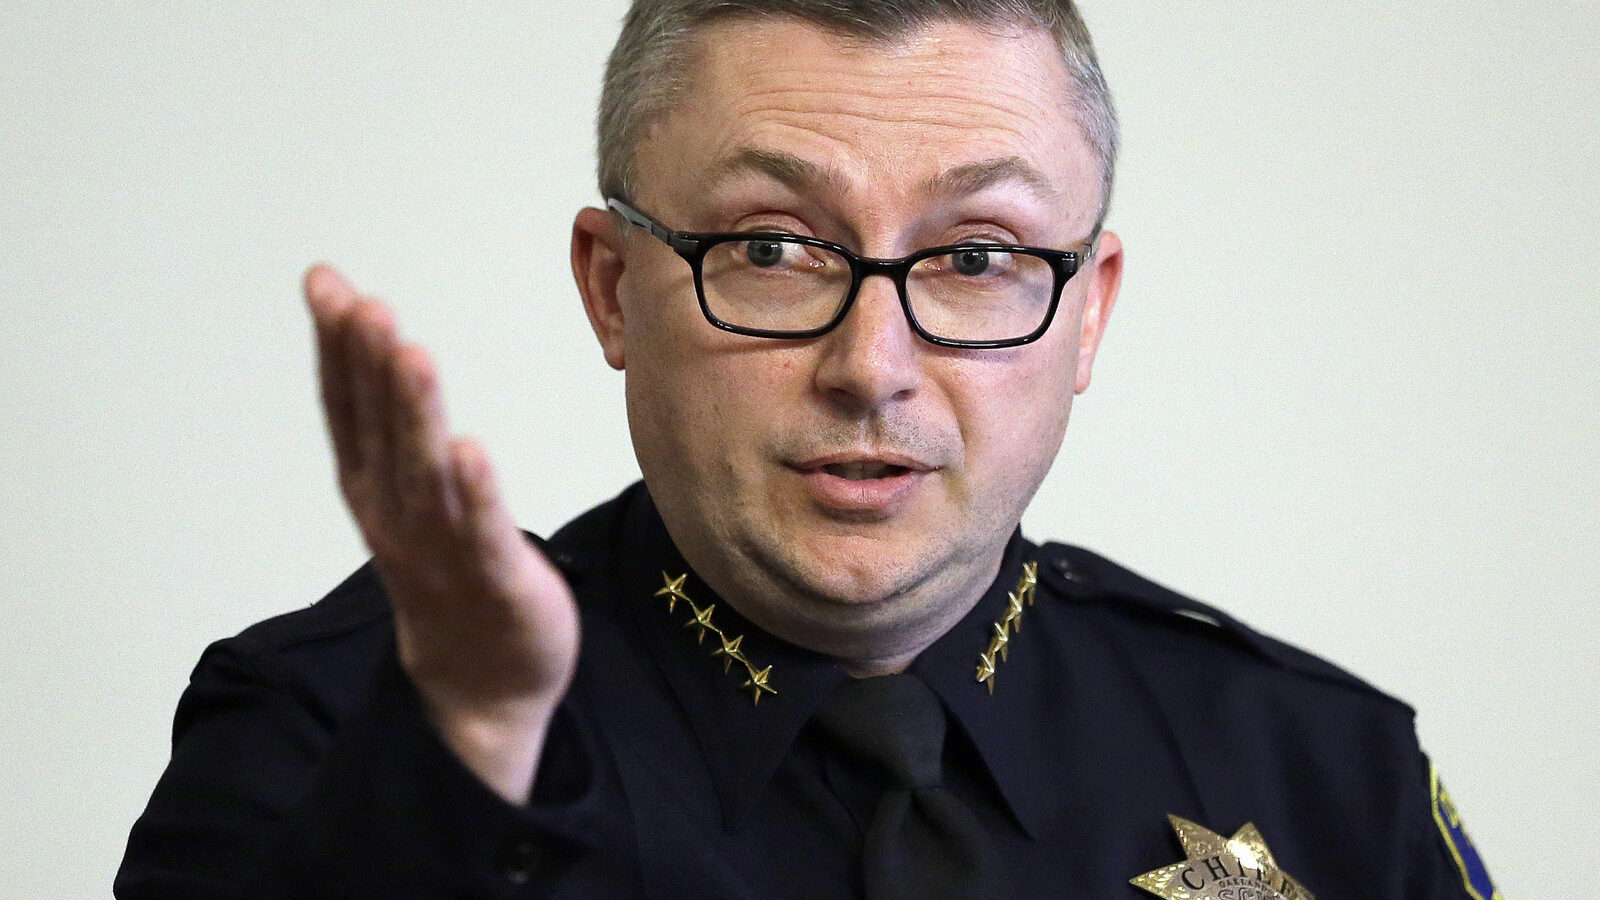 Oakland Chief of Police Sean Whent speaks during a news conference in Oakland, Calif. In a court filing Wednesday, June 21, 2017. (AP/Ben Margot)